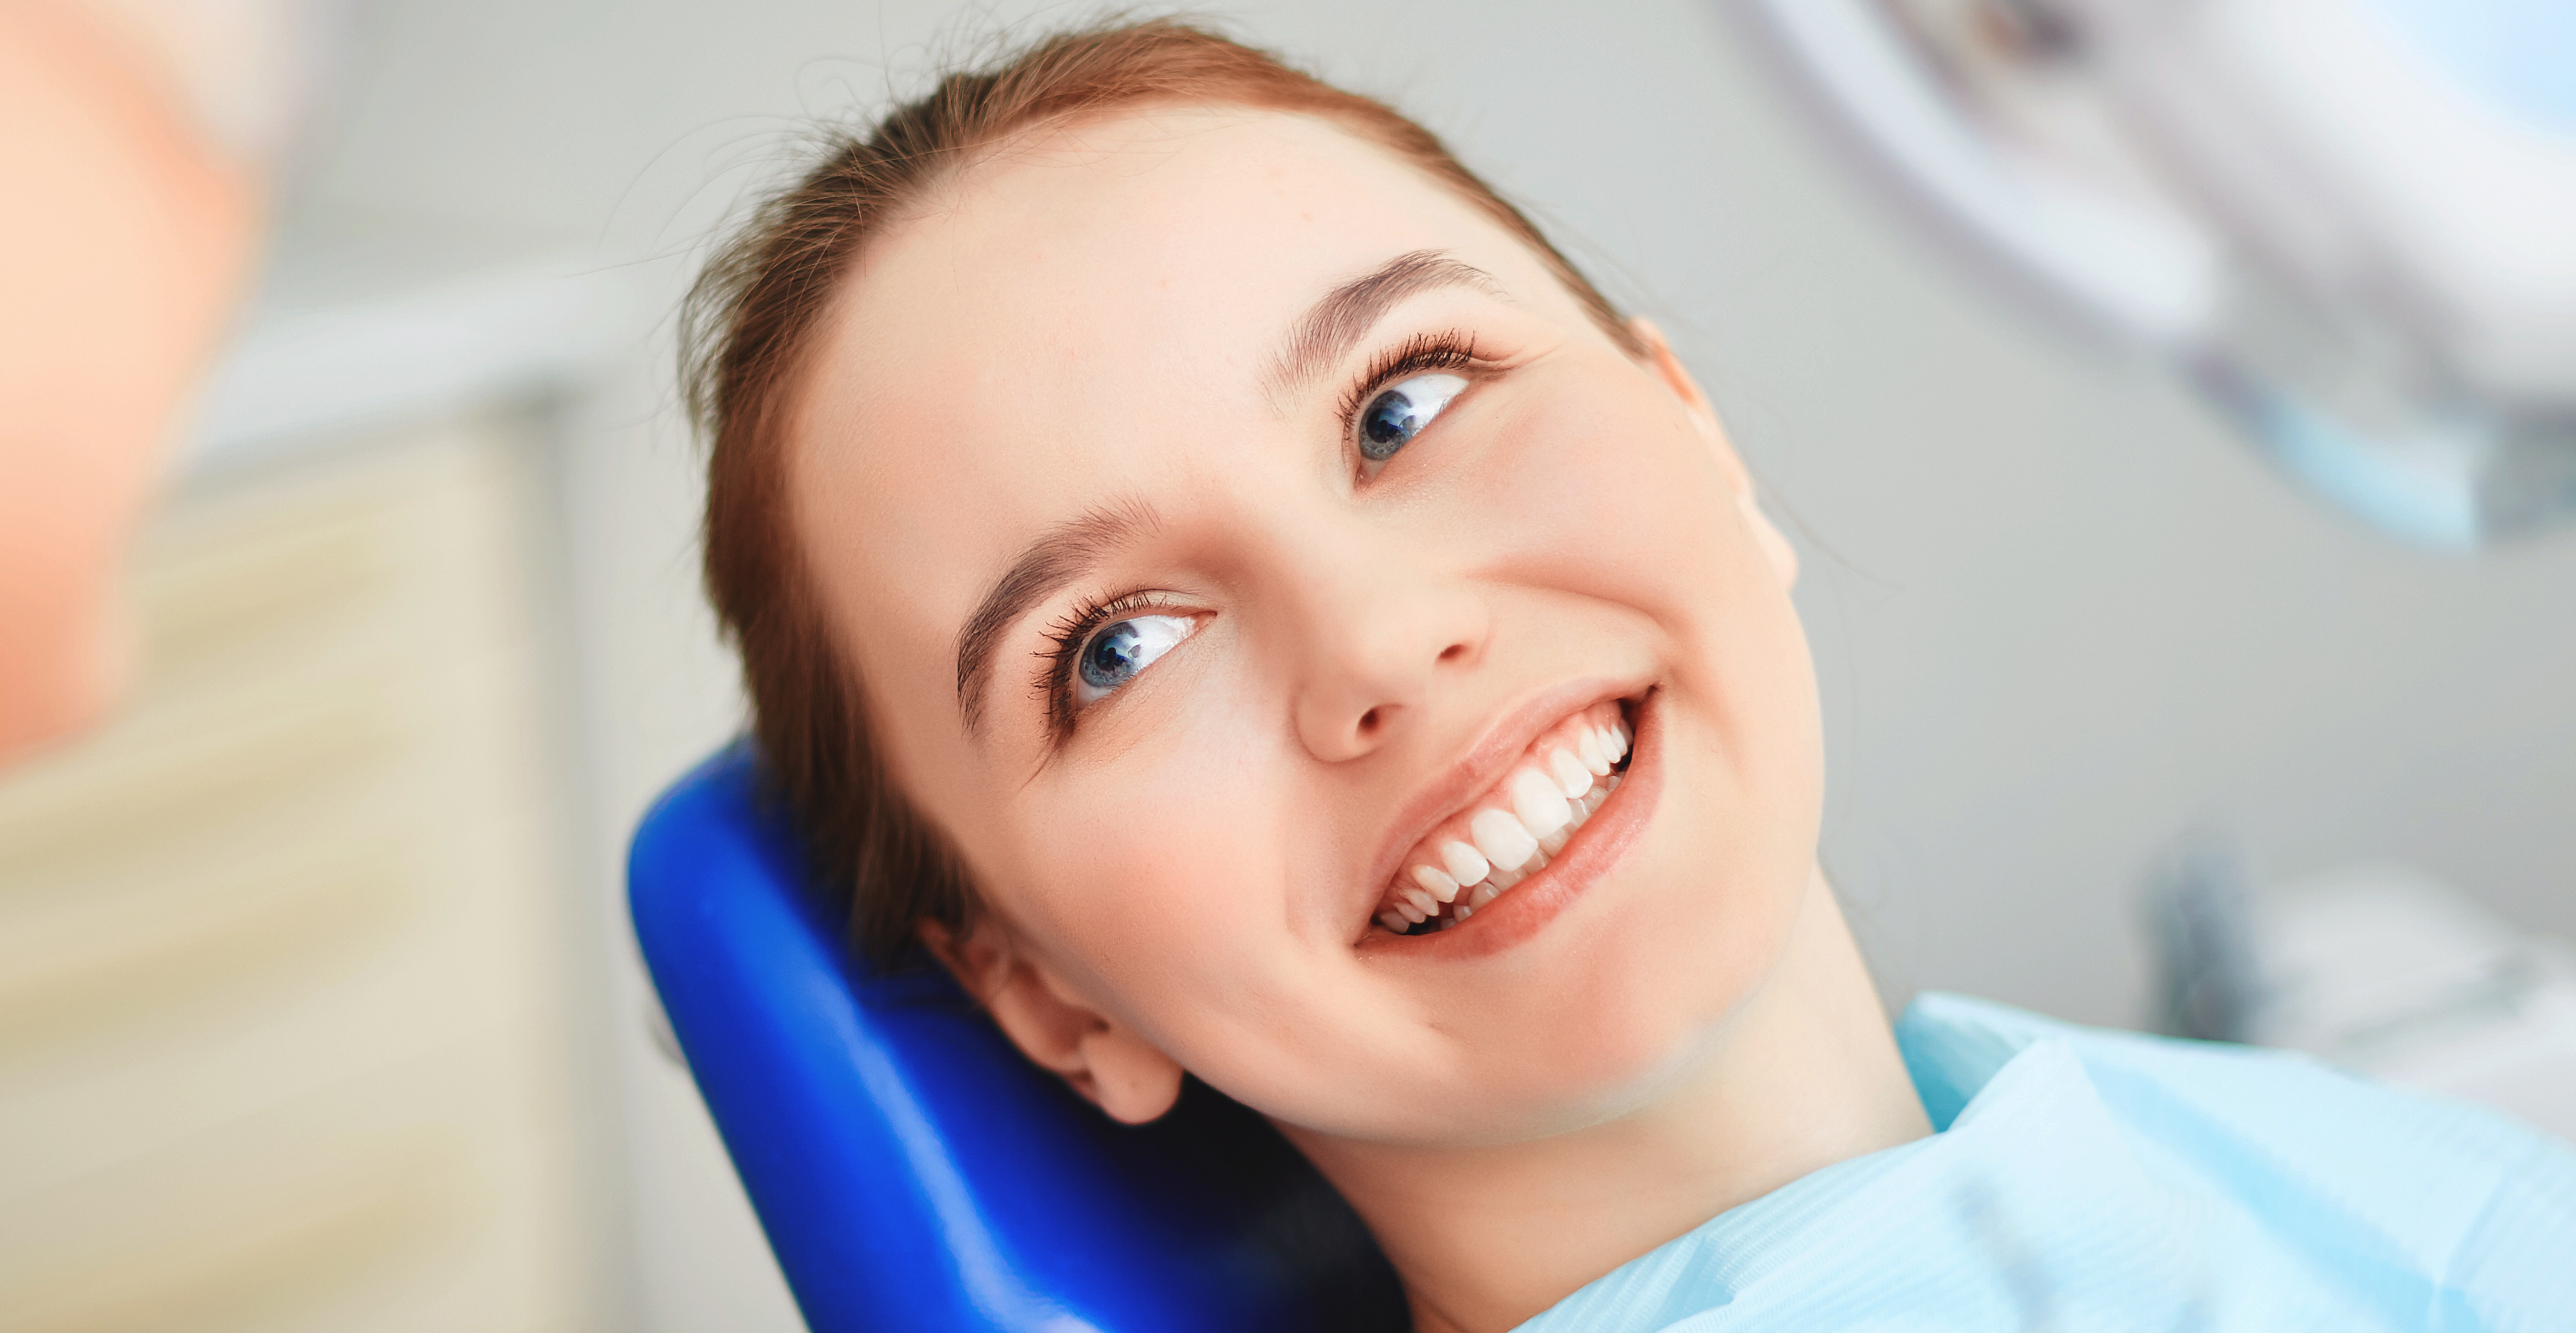 Female patient at Orangeville Smiles Dentistry asking her dentist how much does wisdom teeth removal cost.